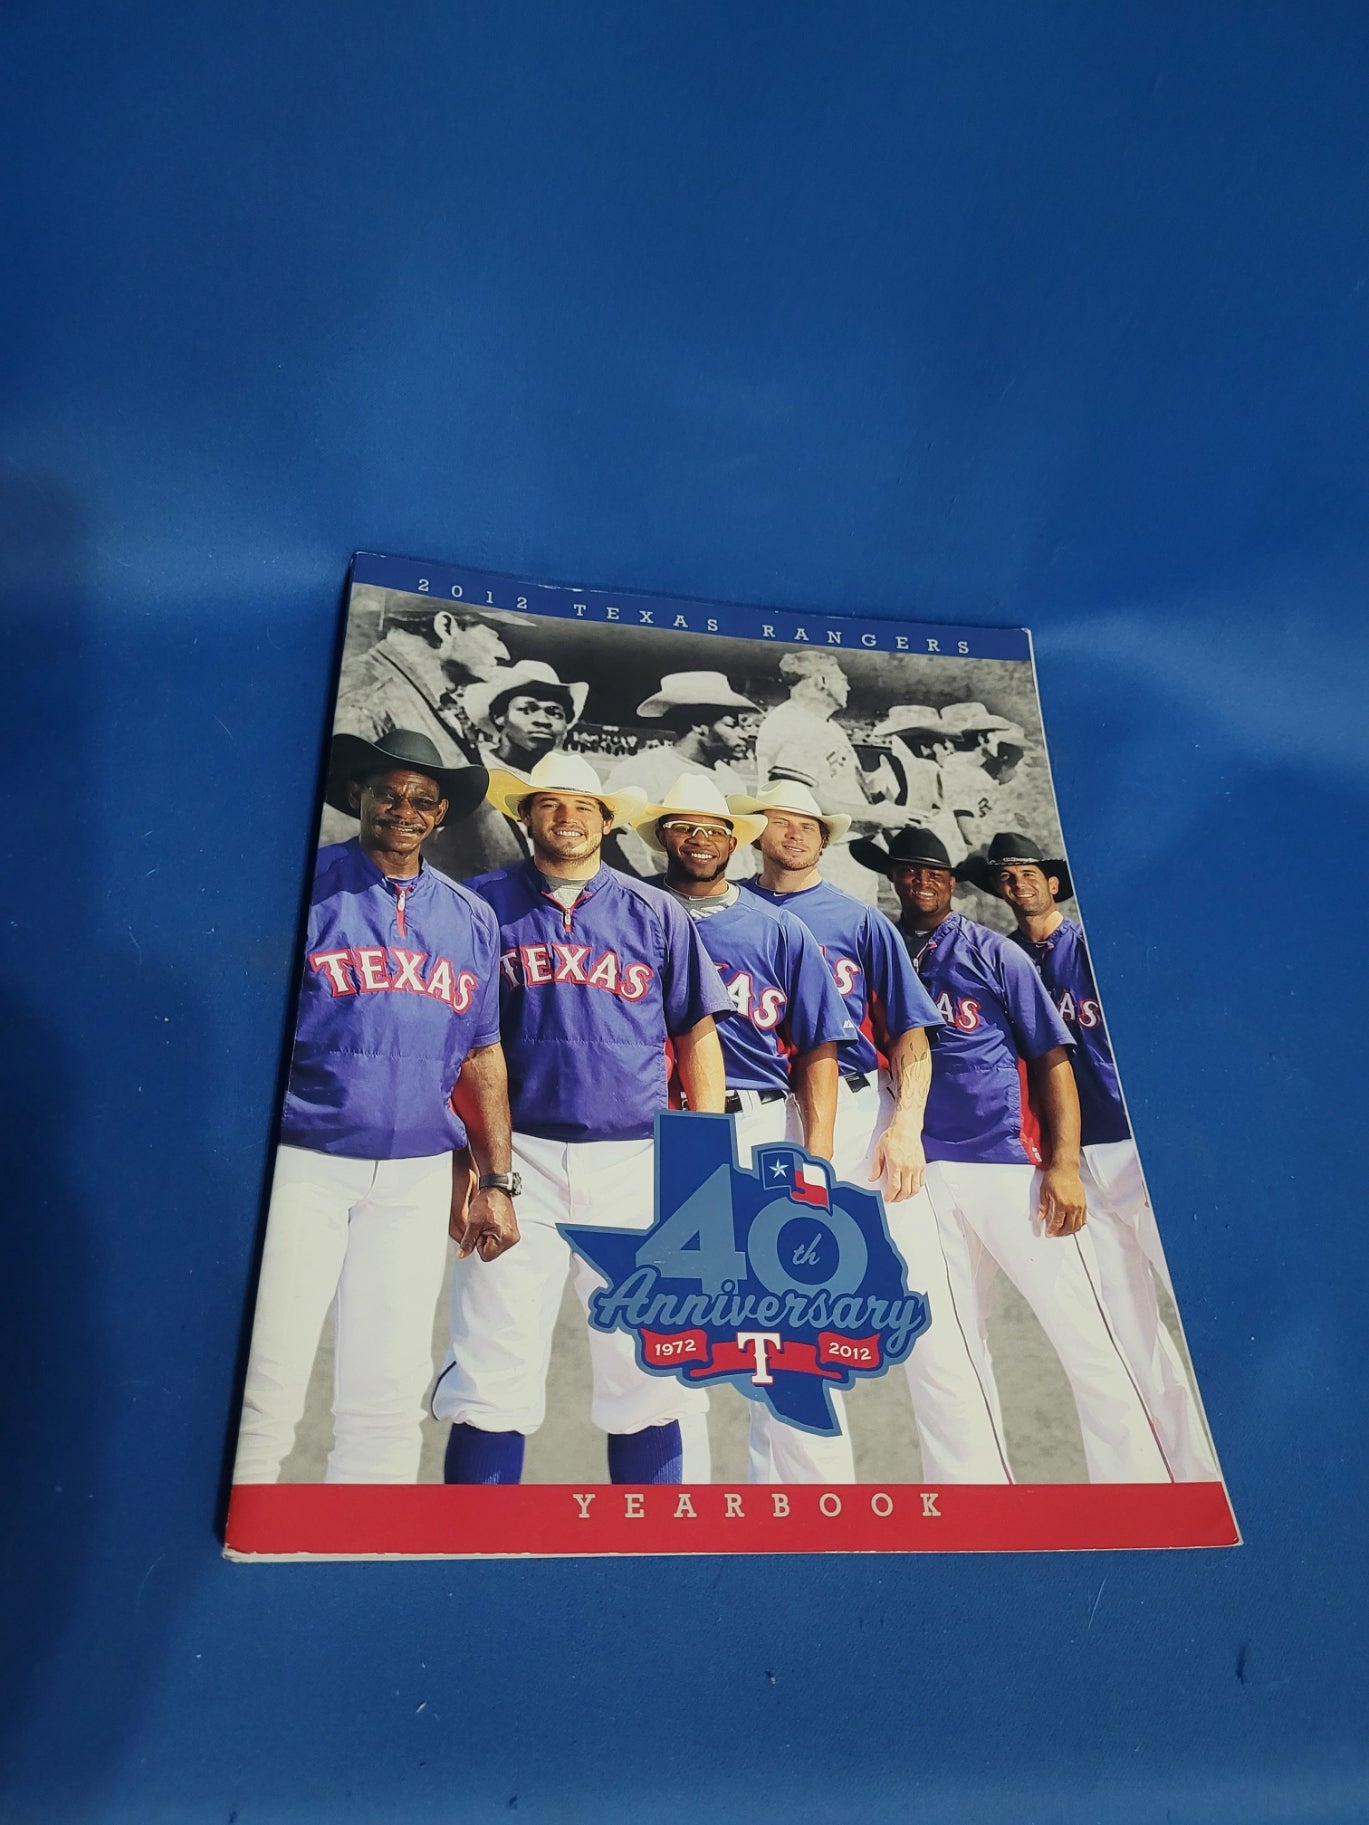 2012 Texas Rangers 40th Anniversary Yearbook 1972 to 2012